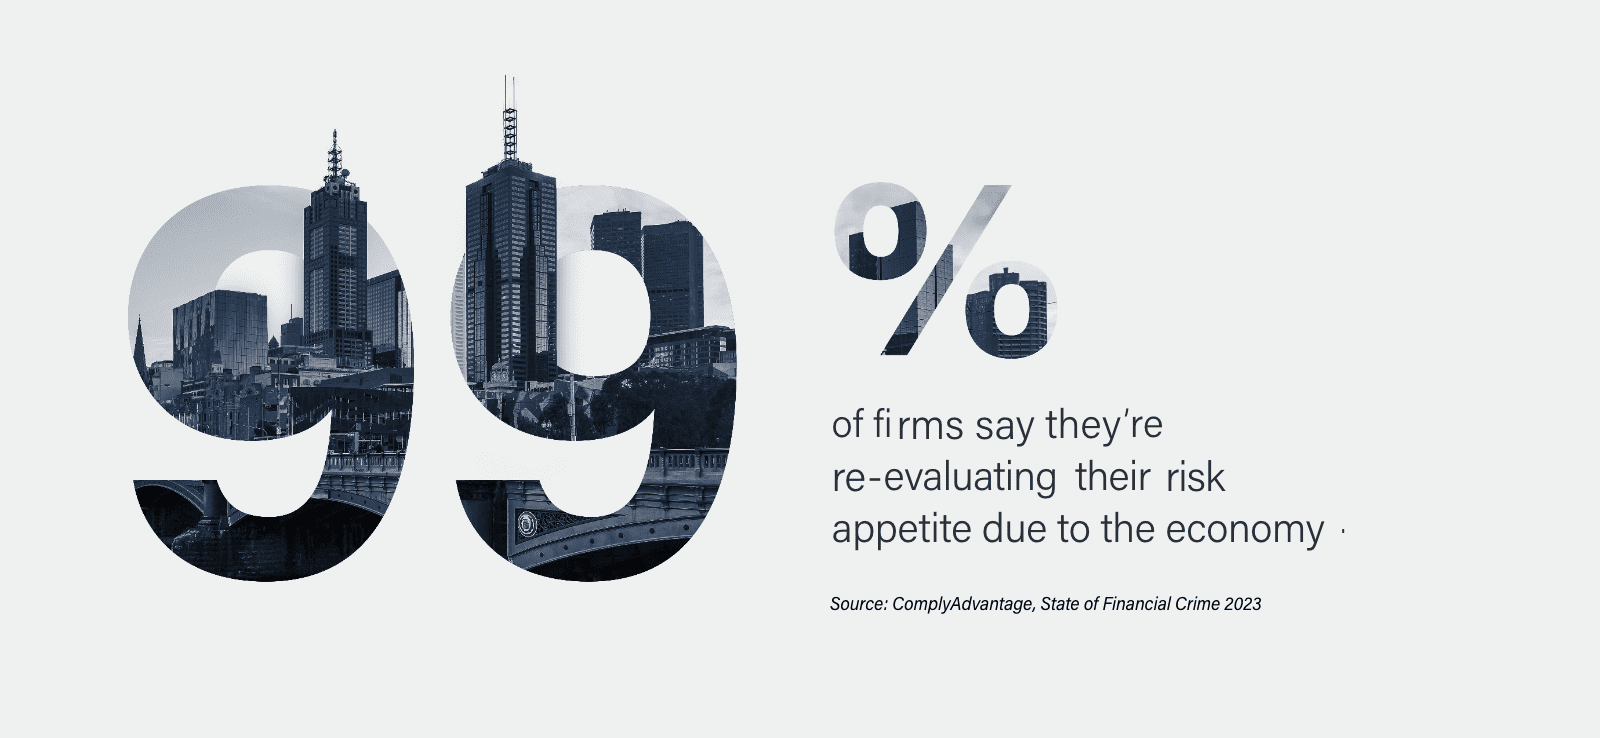 99% of firms are reevaluating their risk appetitie